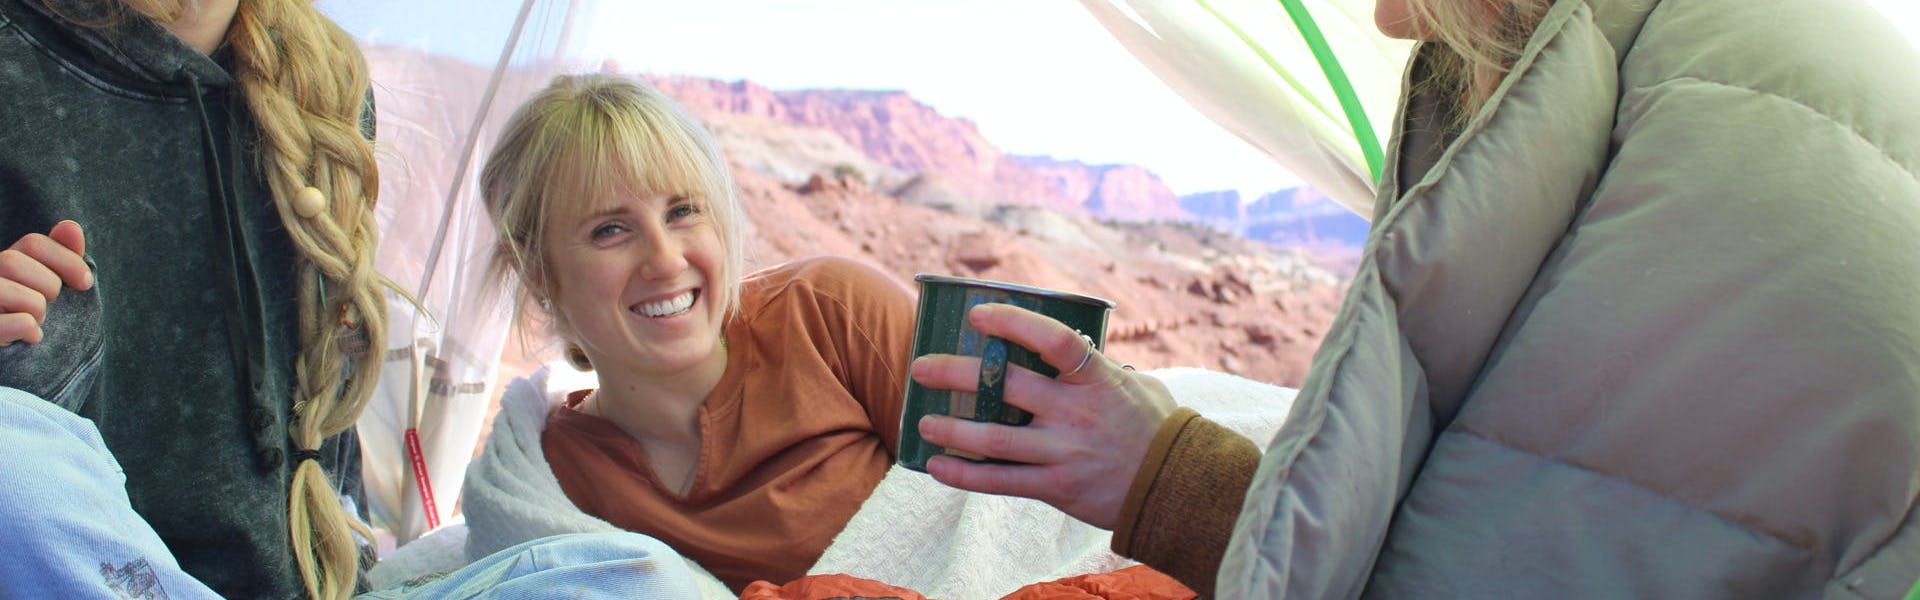 Three campers sit in a tent together laughing. One is looking at the camera and one is holding a mug. There are mountains in the background. 